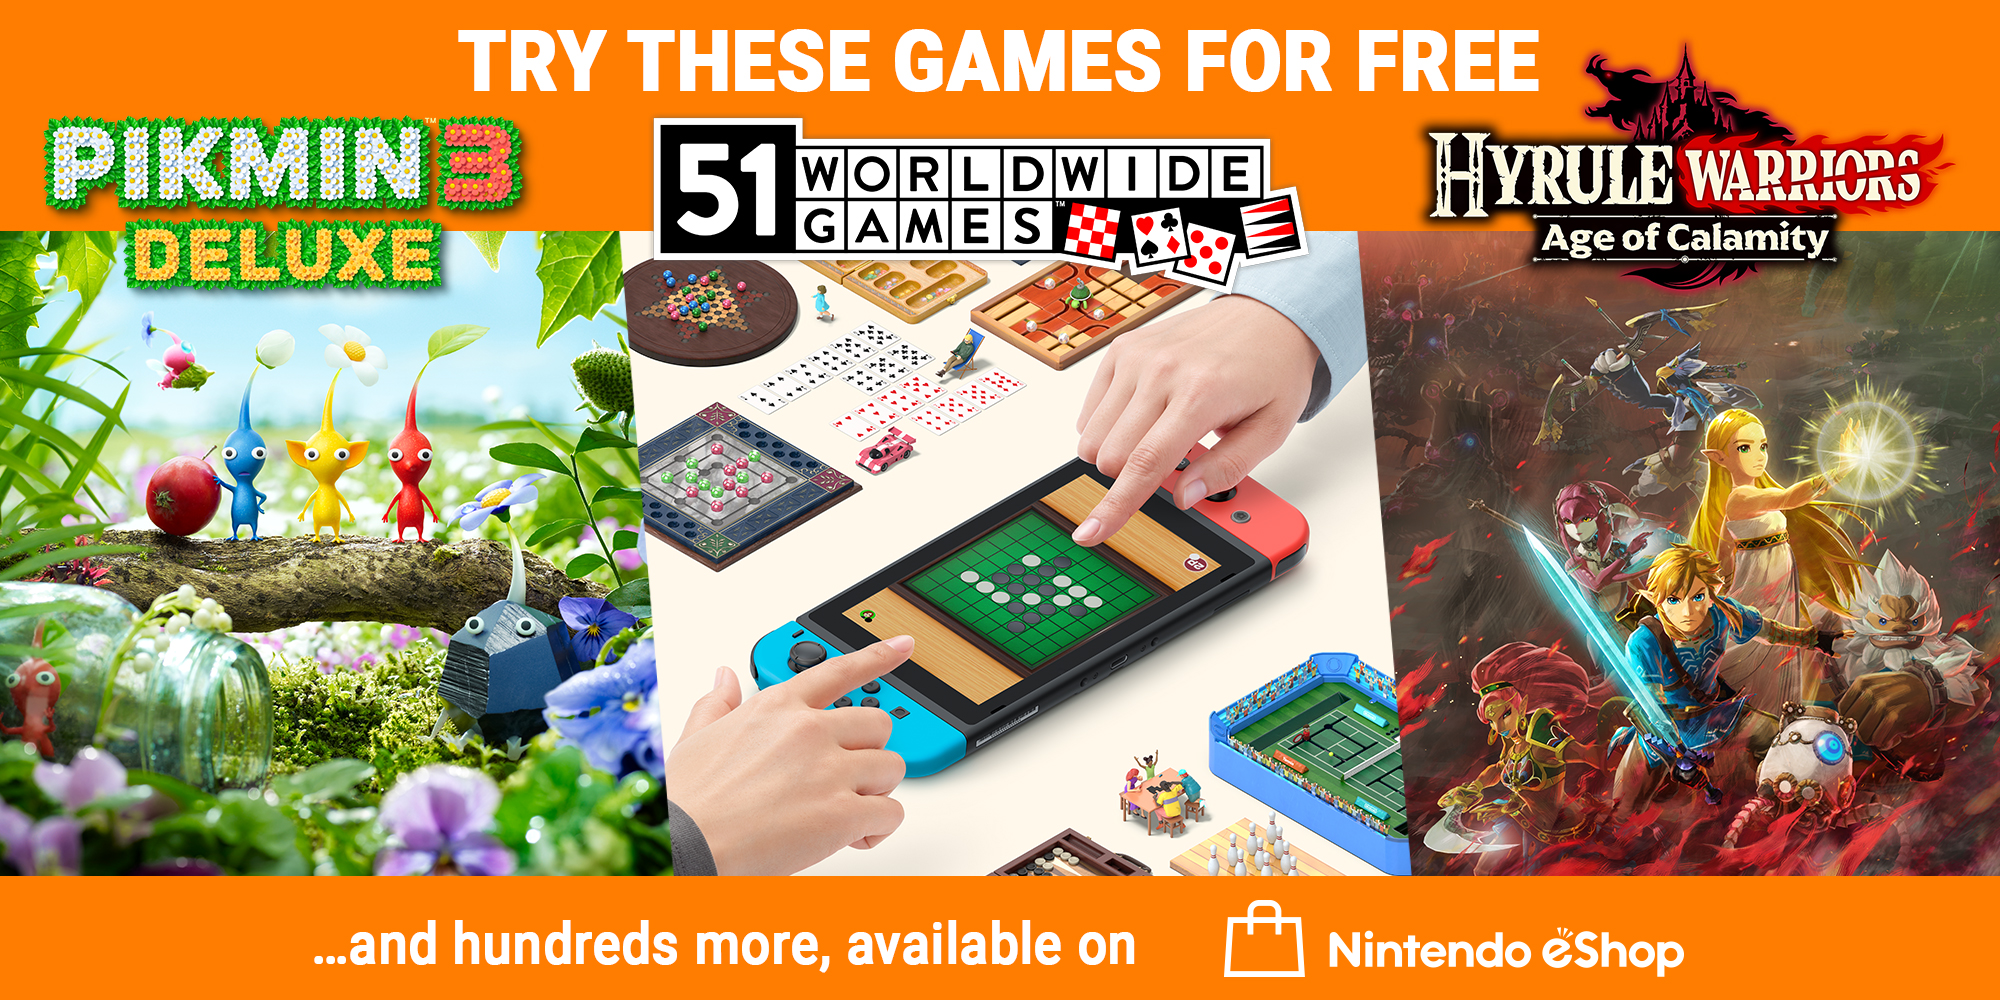 moat loan shade Try three great games for free on Nintendo Switch! | News | Nintendo